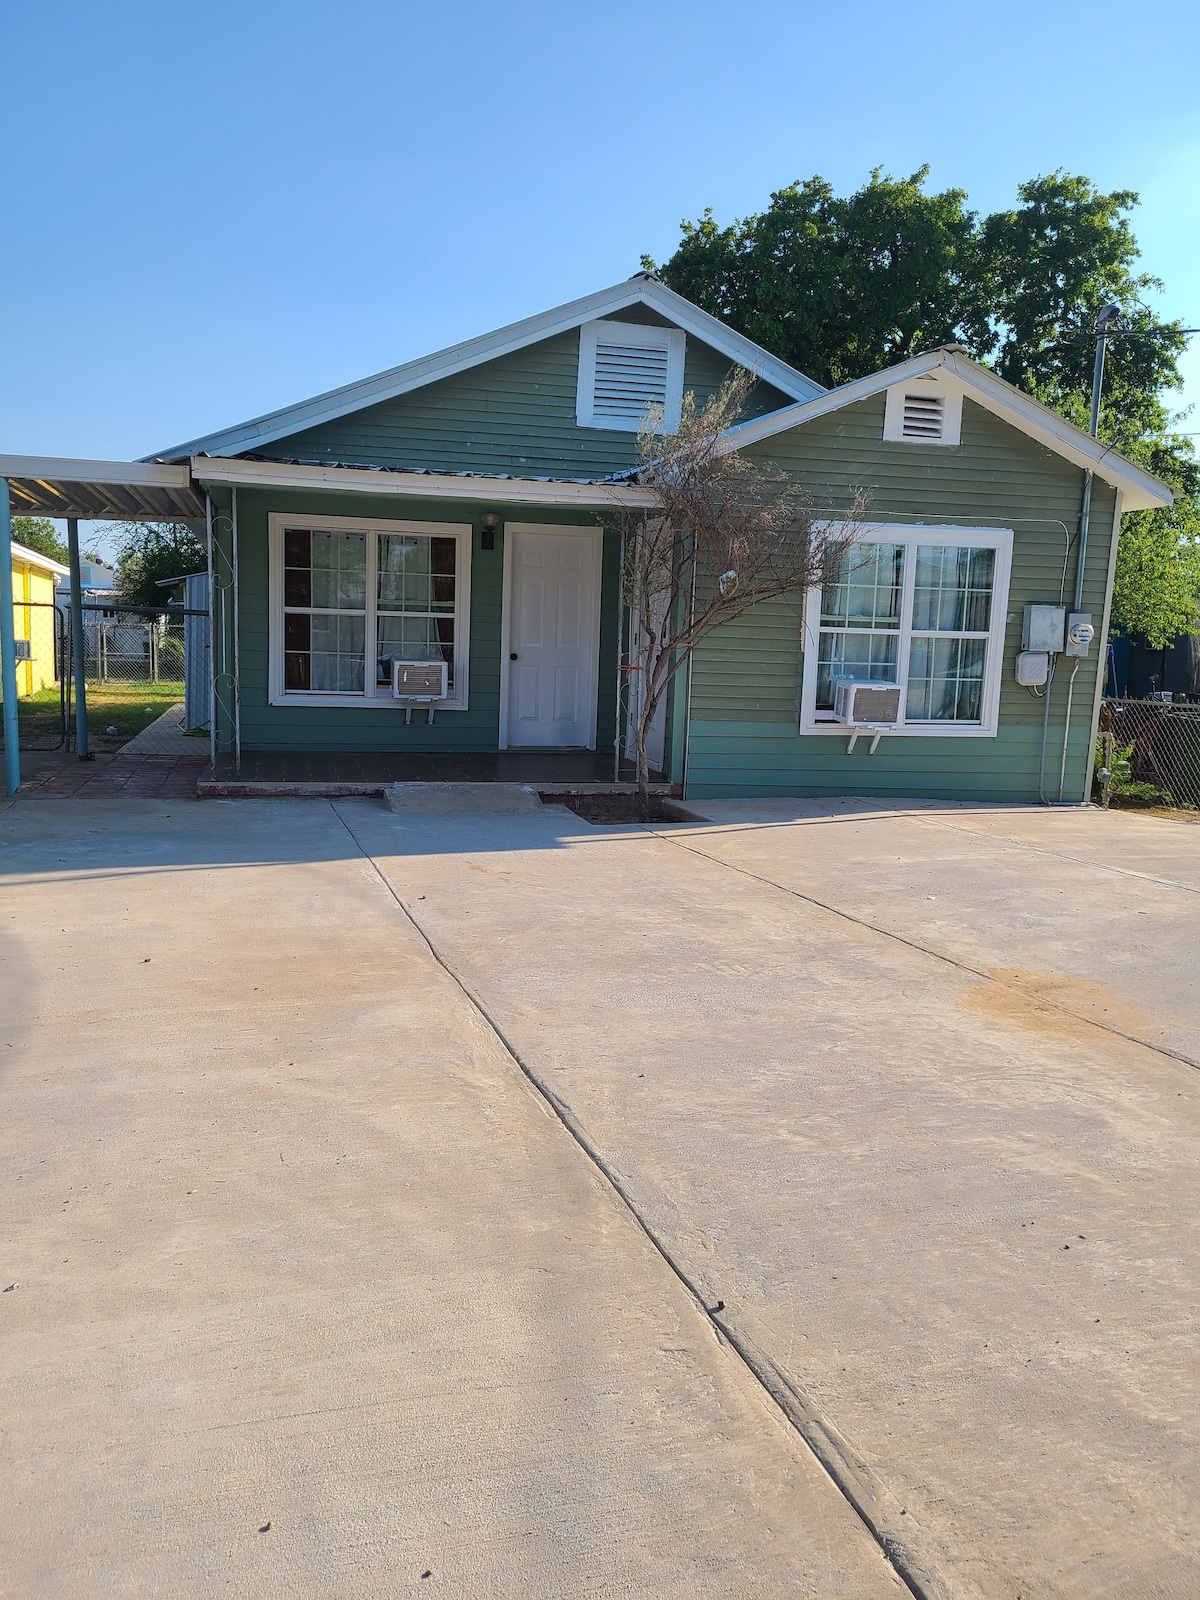 2 bedroom Home in Central Laredo Pets Welcomed!